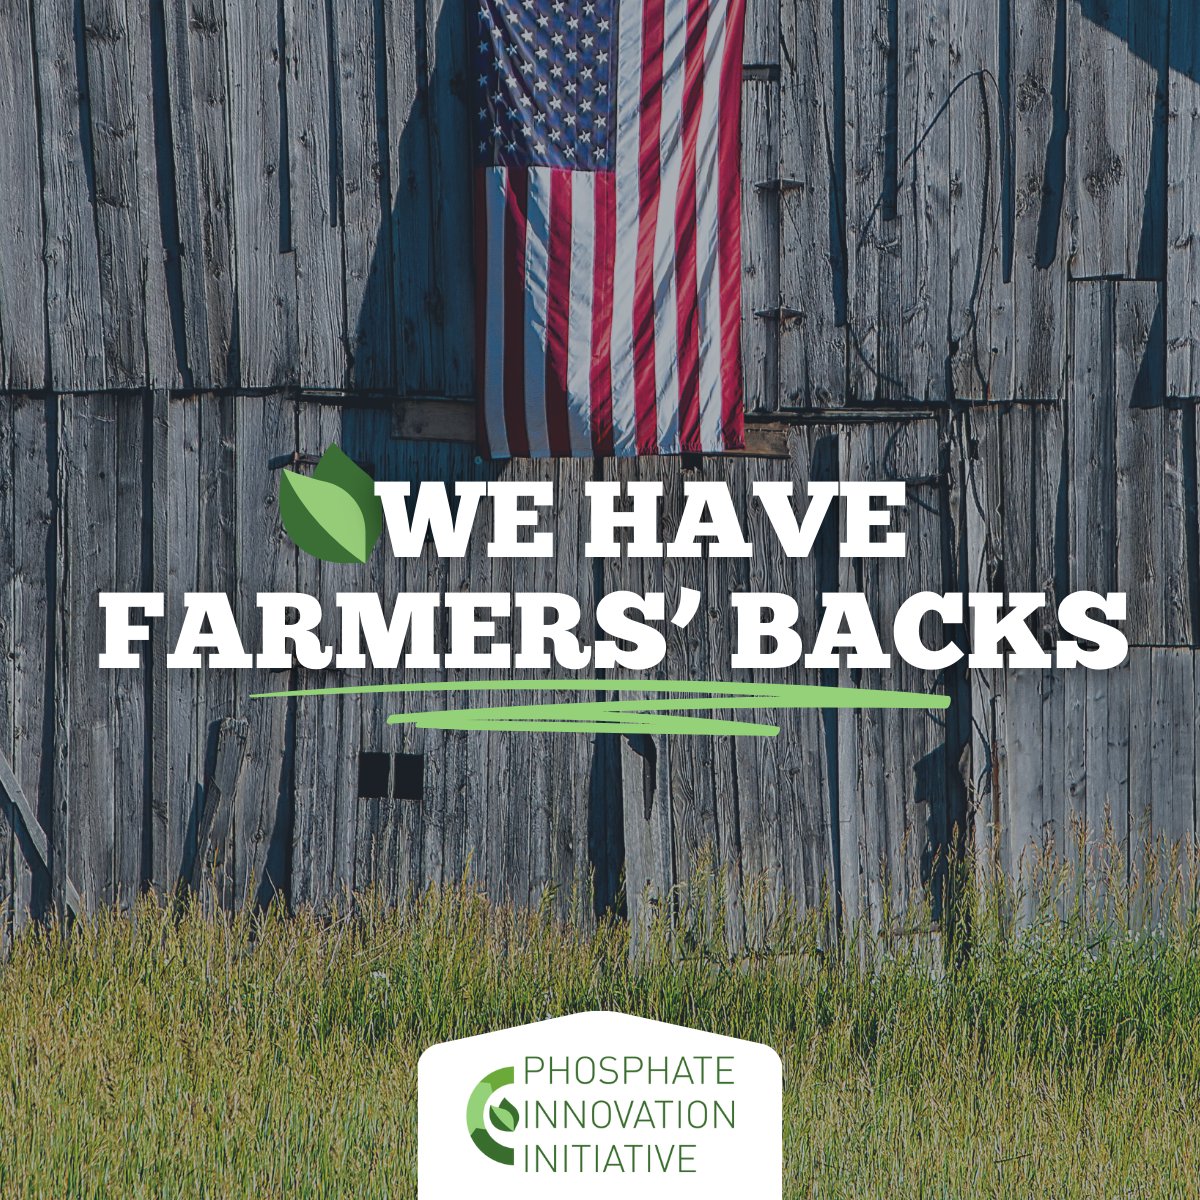 🚜 Supporting American farmers, one harvest at a time! Florida phosphate not only nourishes crops but also creates American jobs. We have farmers’ backs! #AmericanFarmers